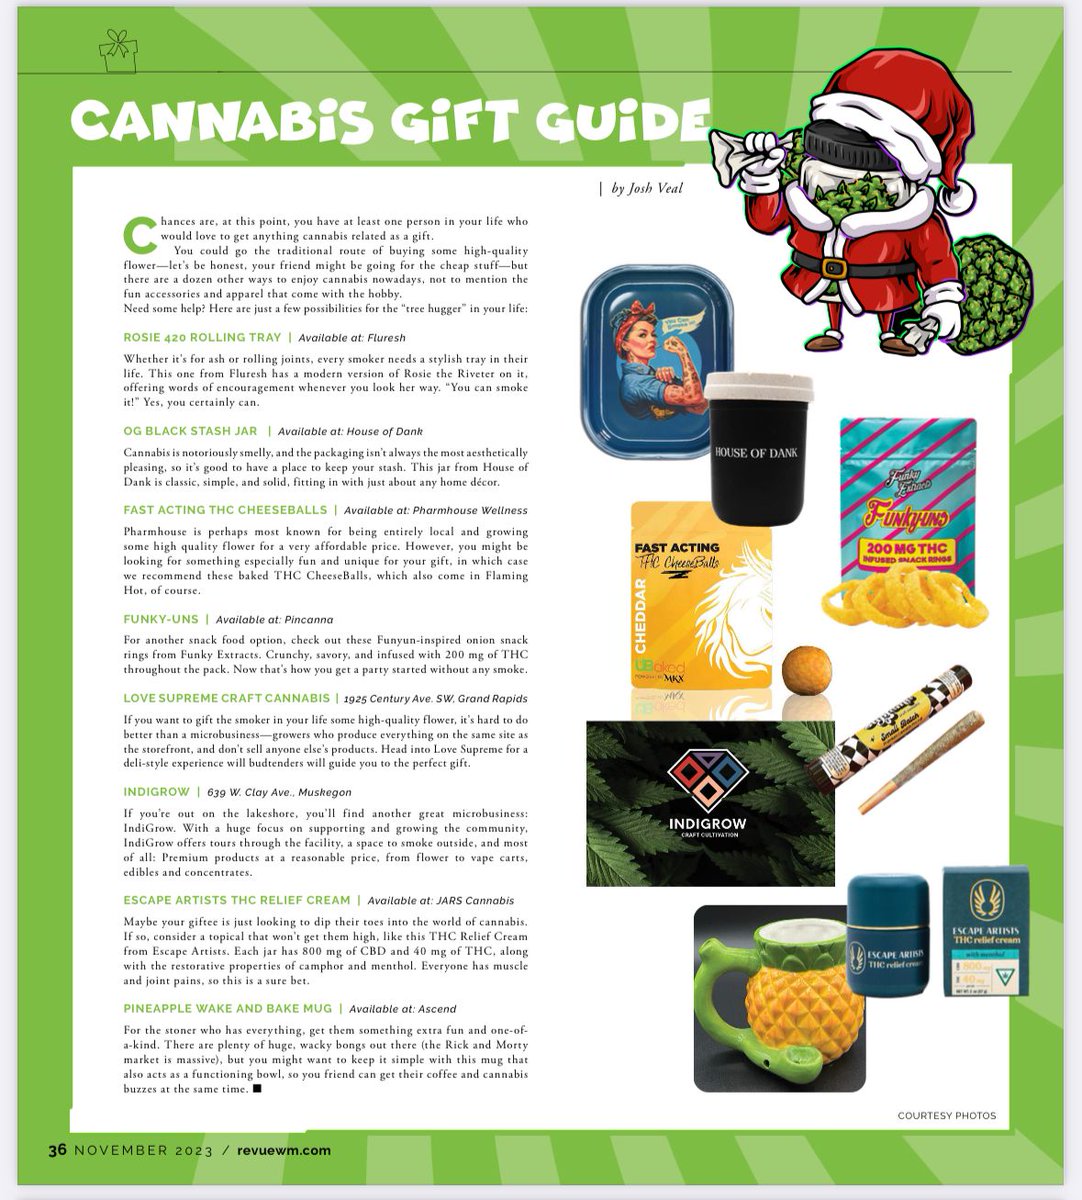 Shop Local this holiday season! We're thrilled to be featured in Revue Magazine's Cannabis Gift Guide! Don't forget- tours make for a great gift too! #microdifference #craftcultivation #resistcorporateweed #onlydowntowndispo #muskegonmicro #thisismuskegon #visitmuskegon